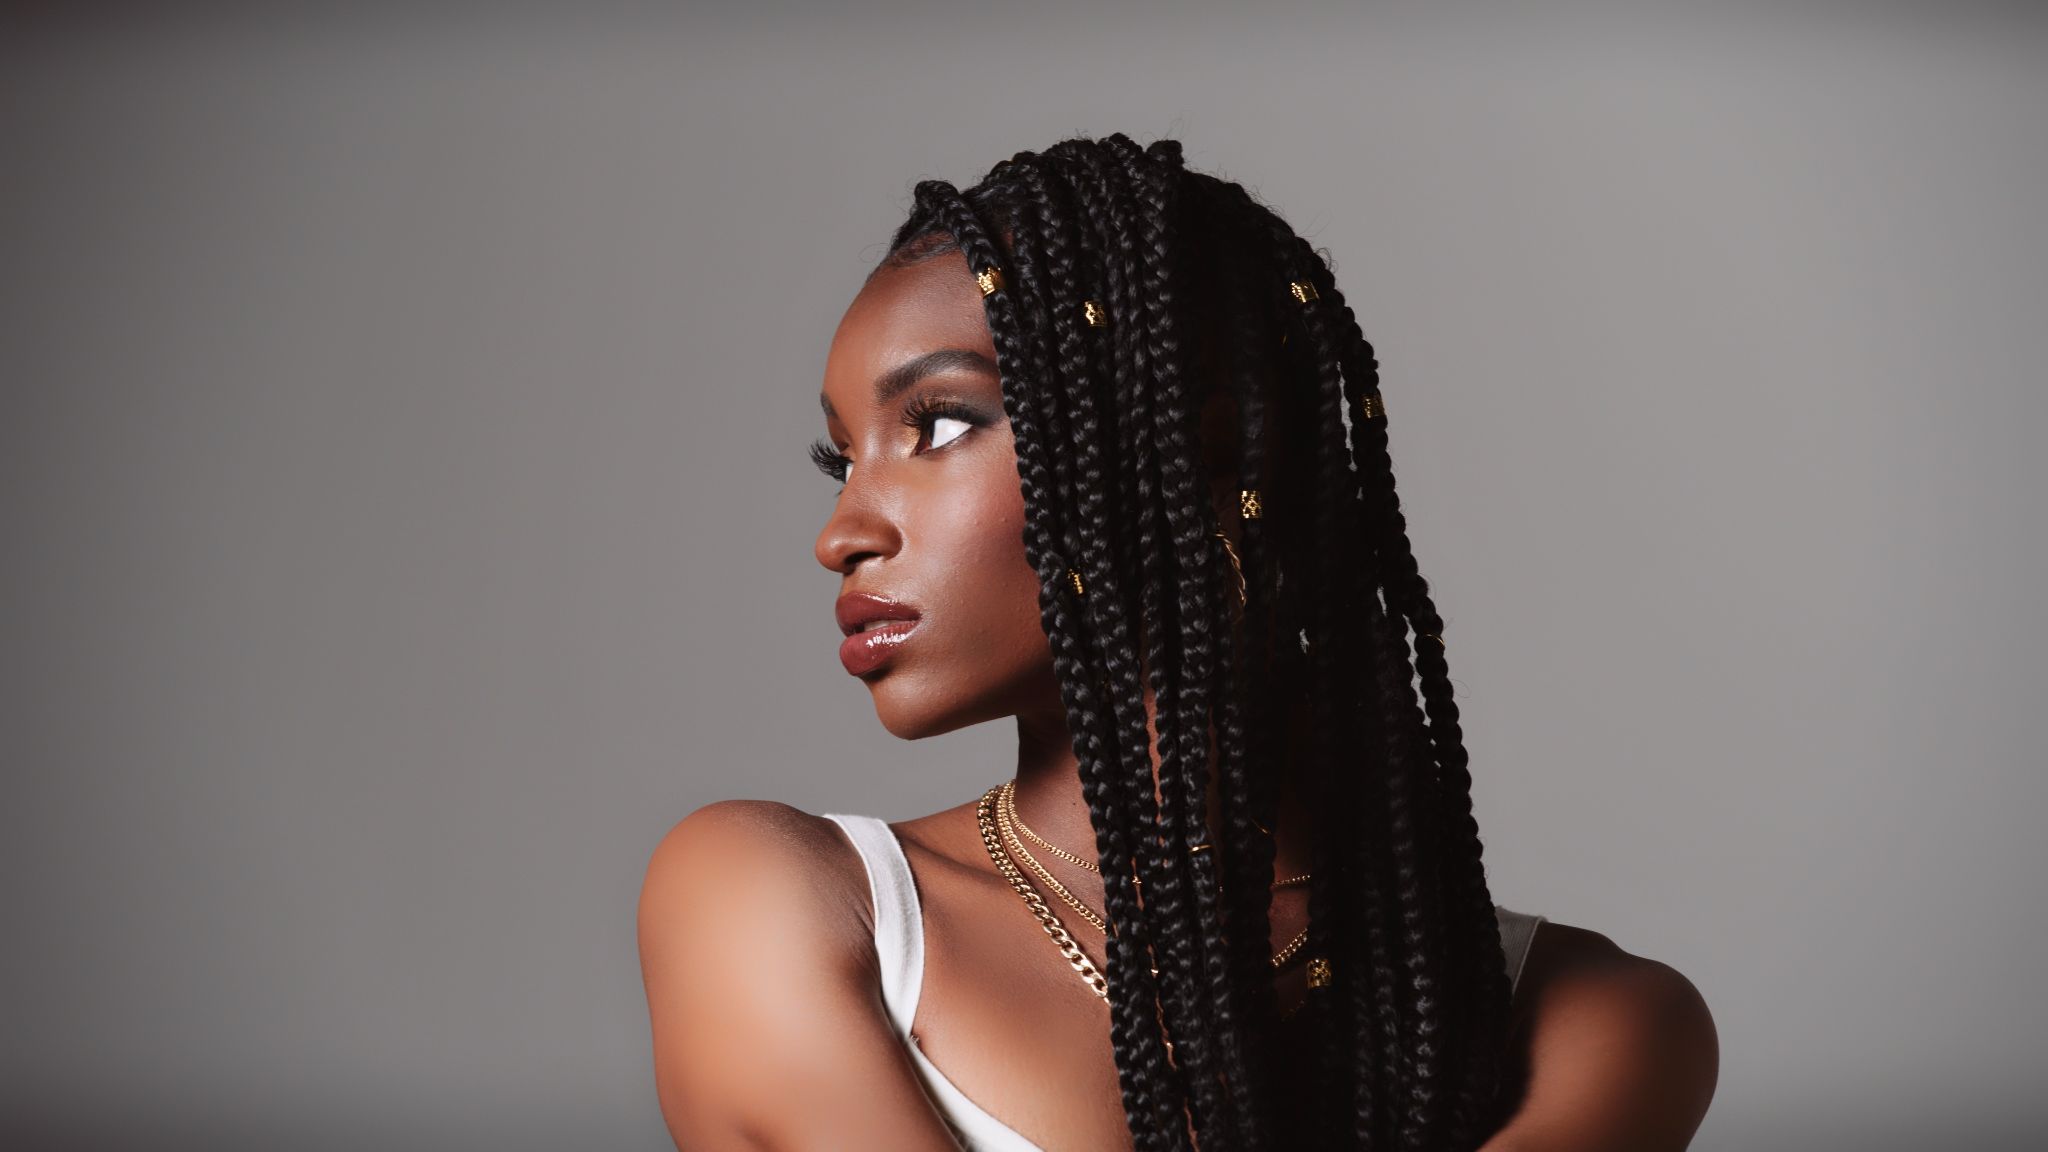 Female African American model headshot with black, braided hair wearing red lipstick, necklaces and white top posing for the camera looking off to the side